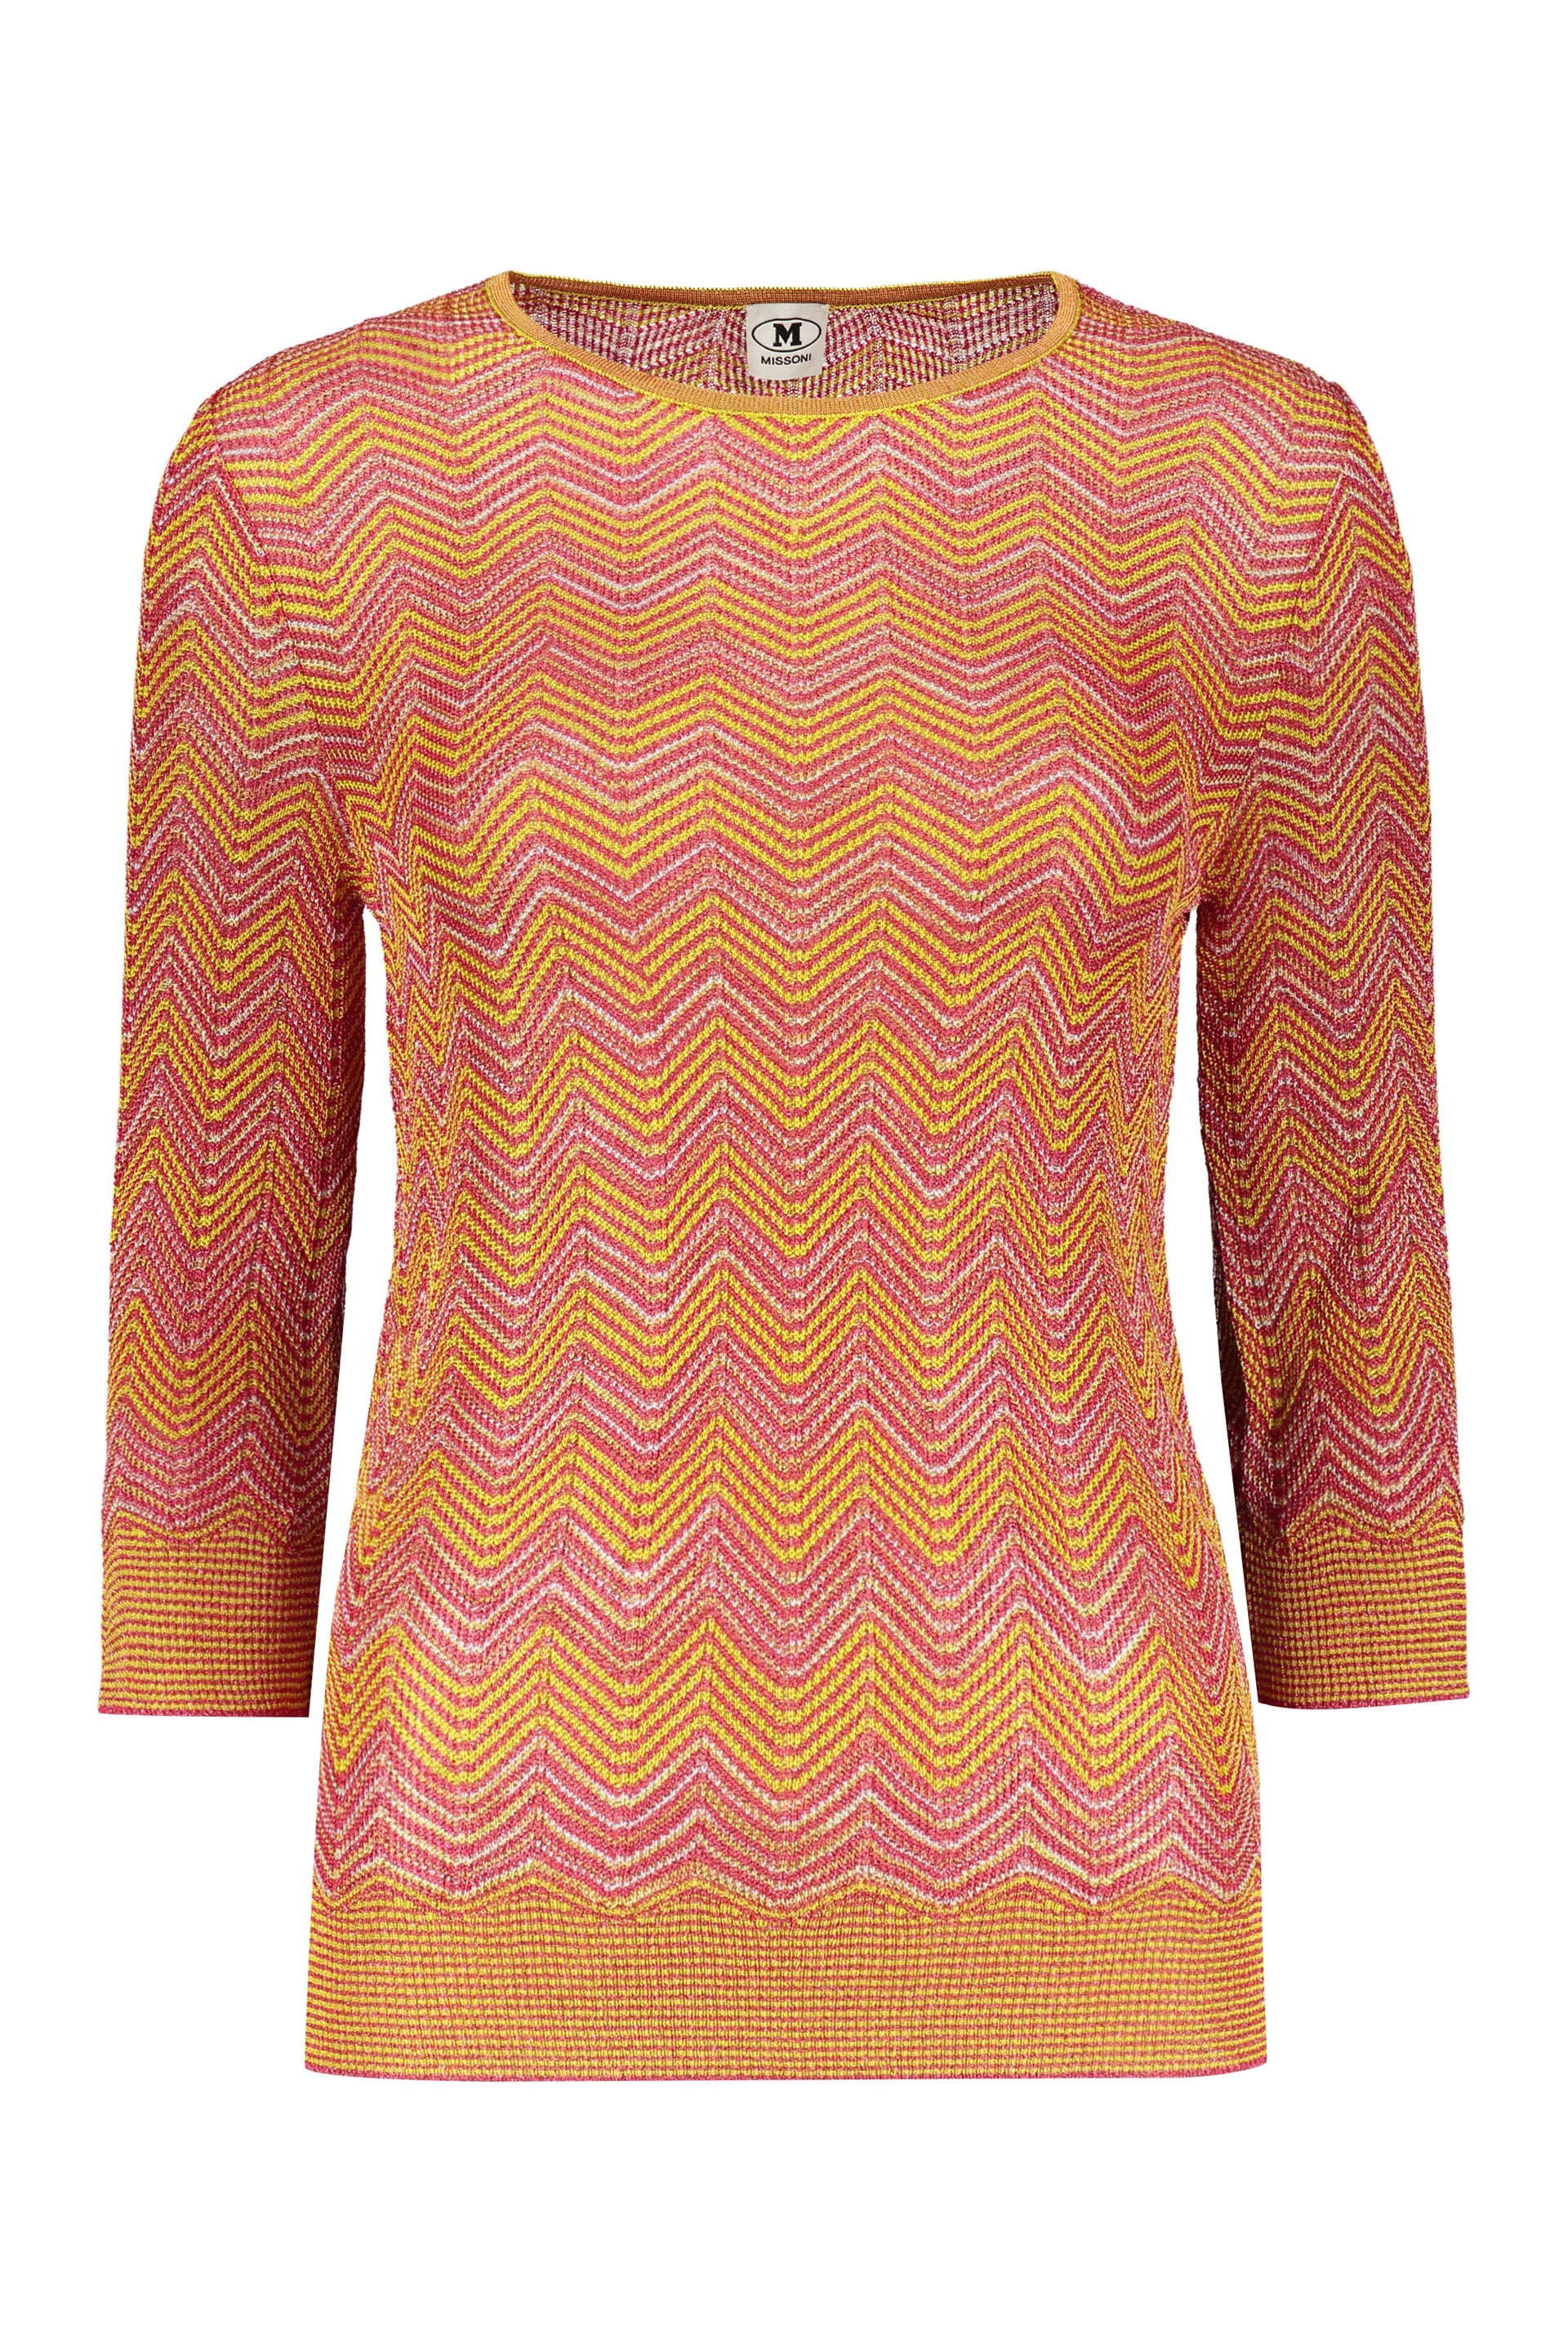 Missoni-OUTLET-SALE-Knitted-top-Shirts-L-ARCHIVE-COLLECTION_b8c3b08b-daf5-4b2a-9cd3-a25a8b7605ae.jpg